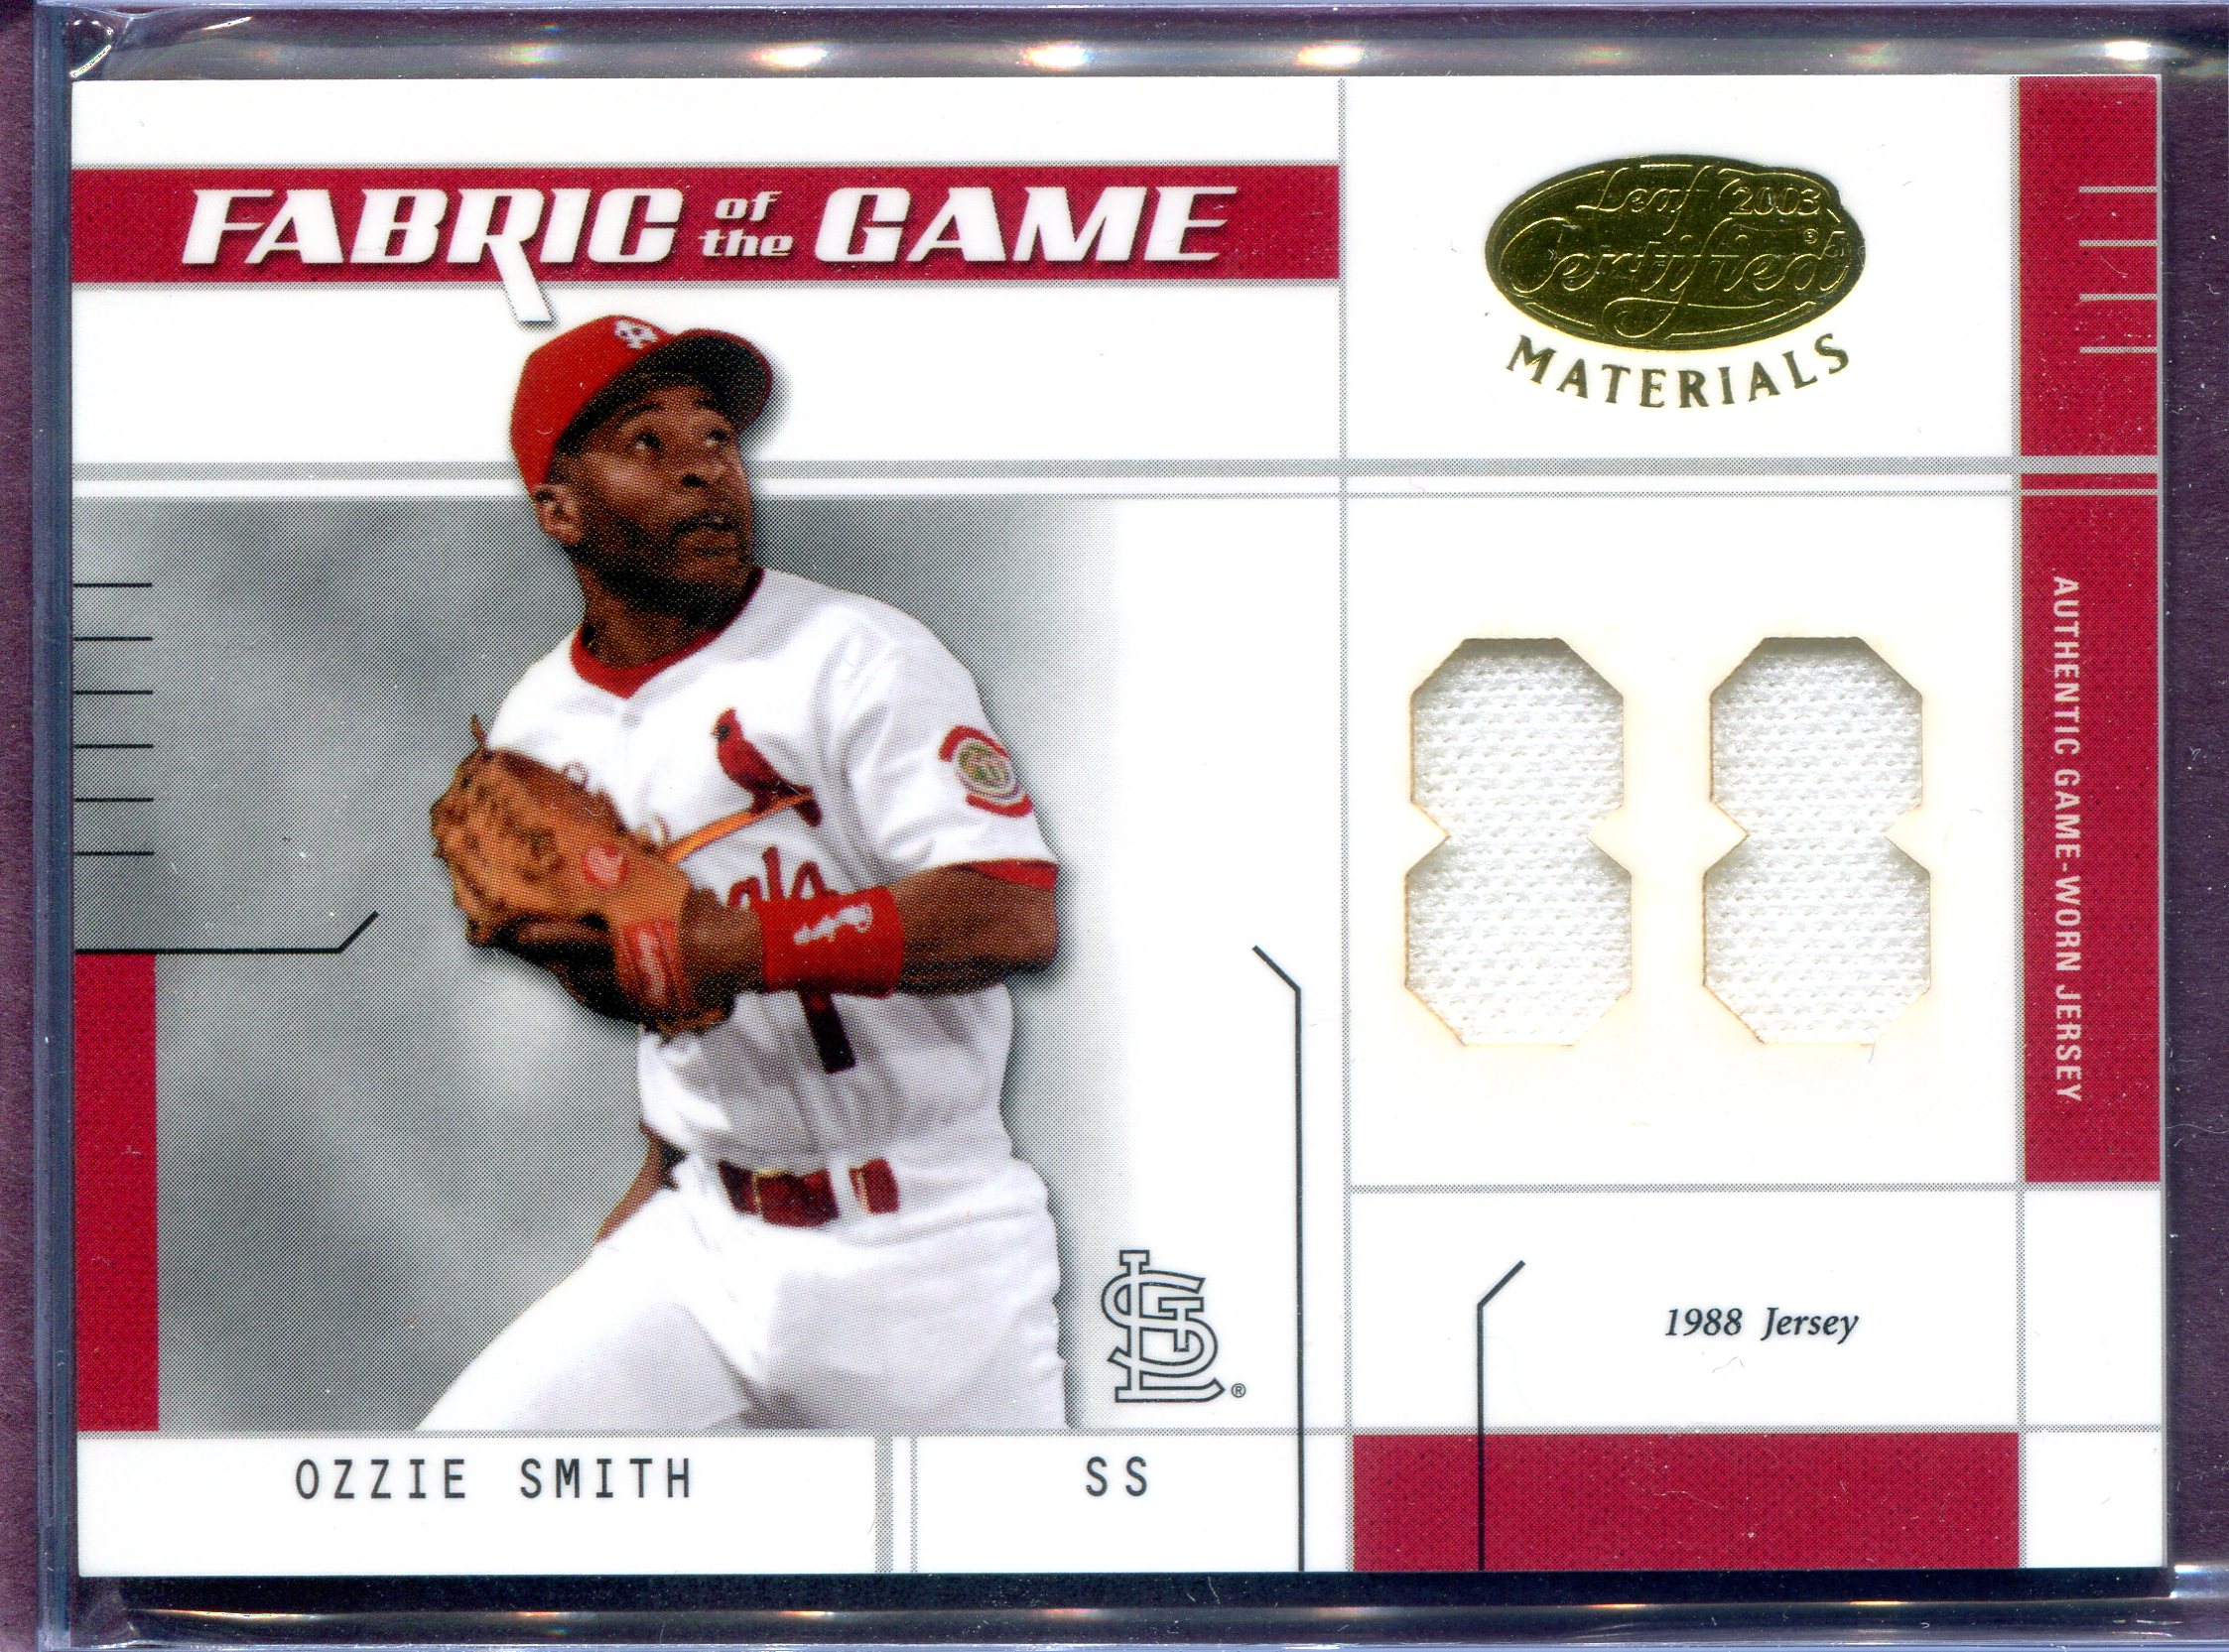 2003 Leaf Certified Materials Fabric of the Game #2JY Ozzie Smith JY/88